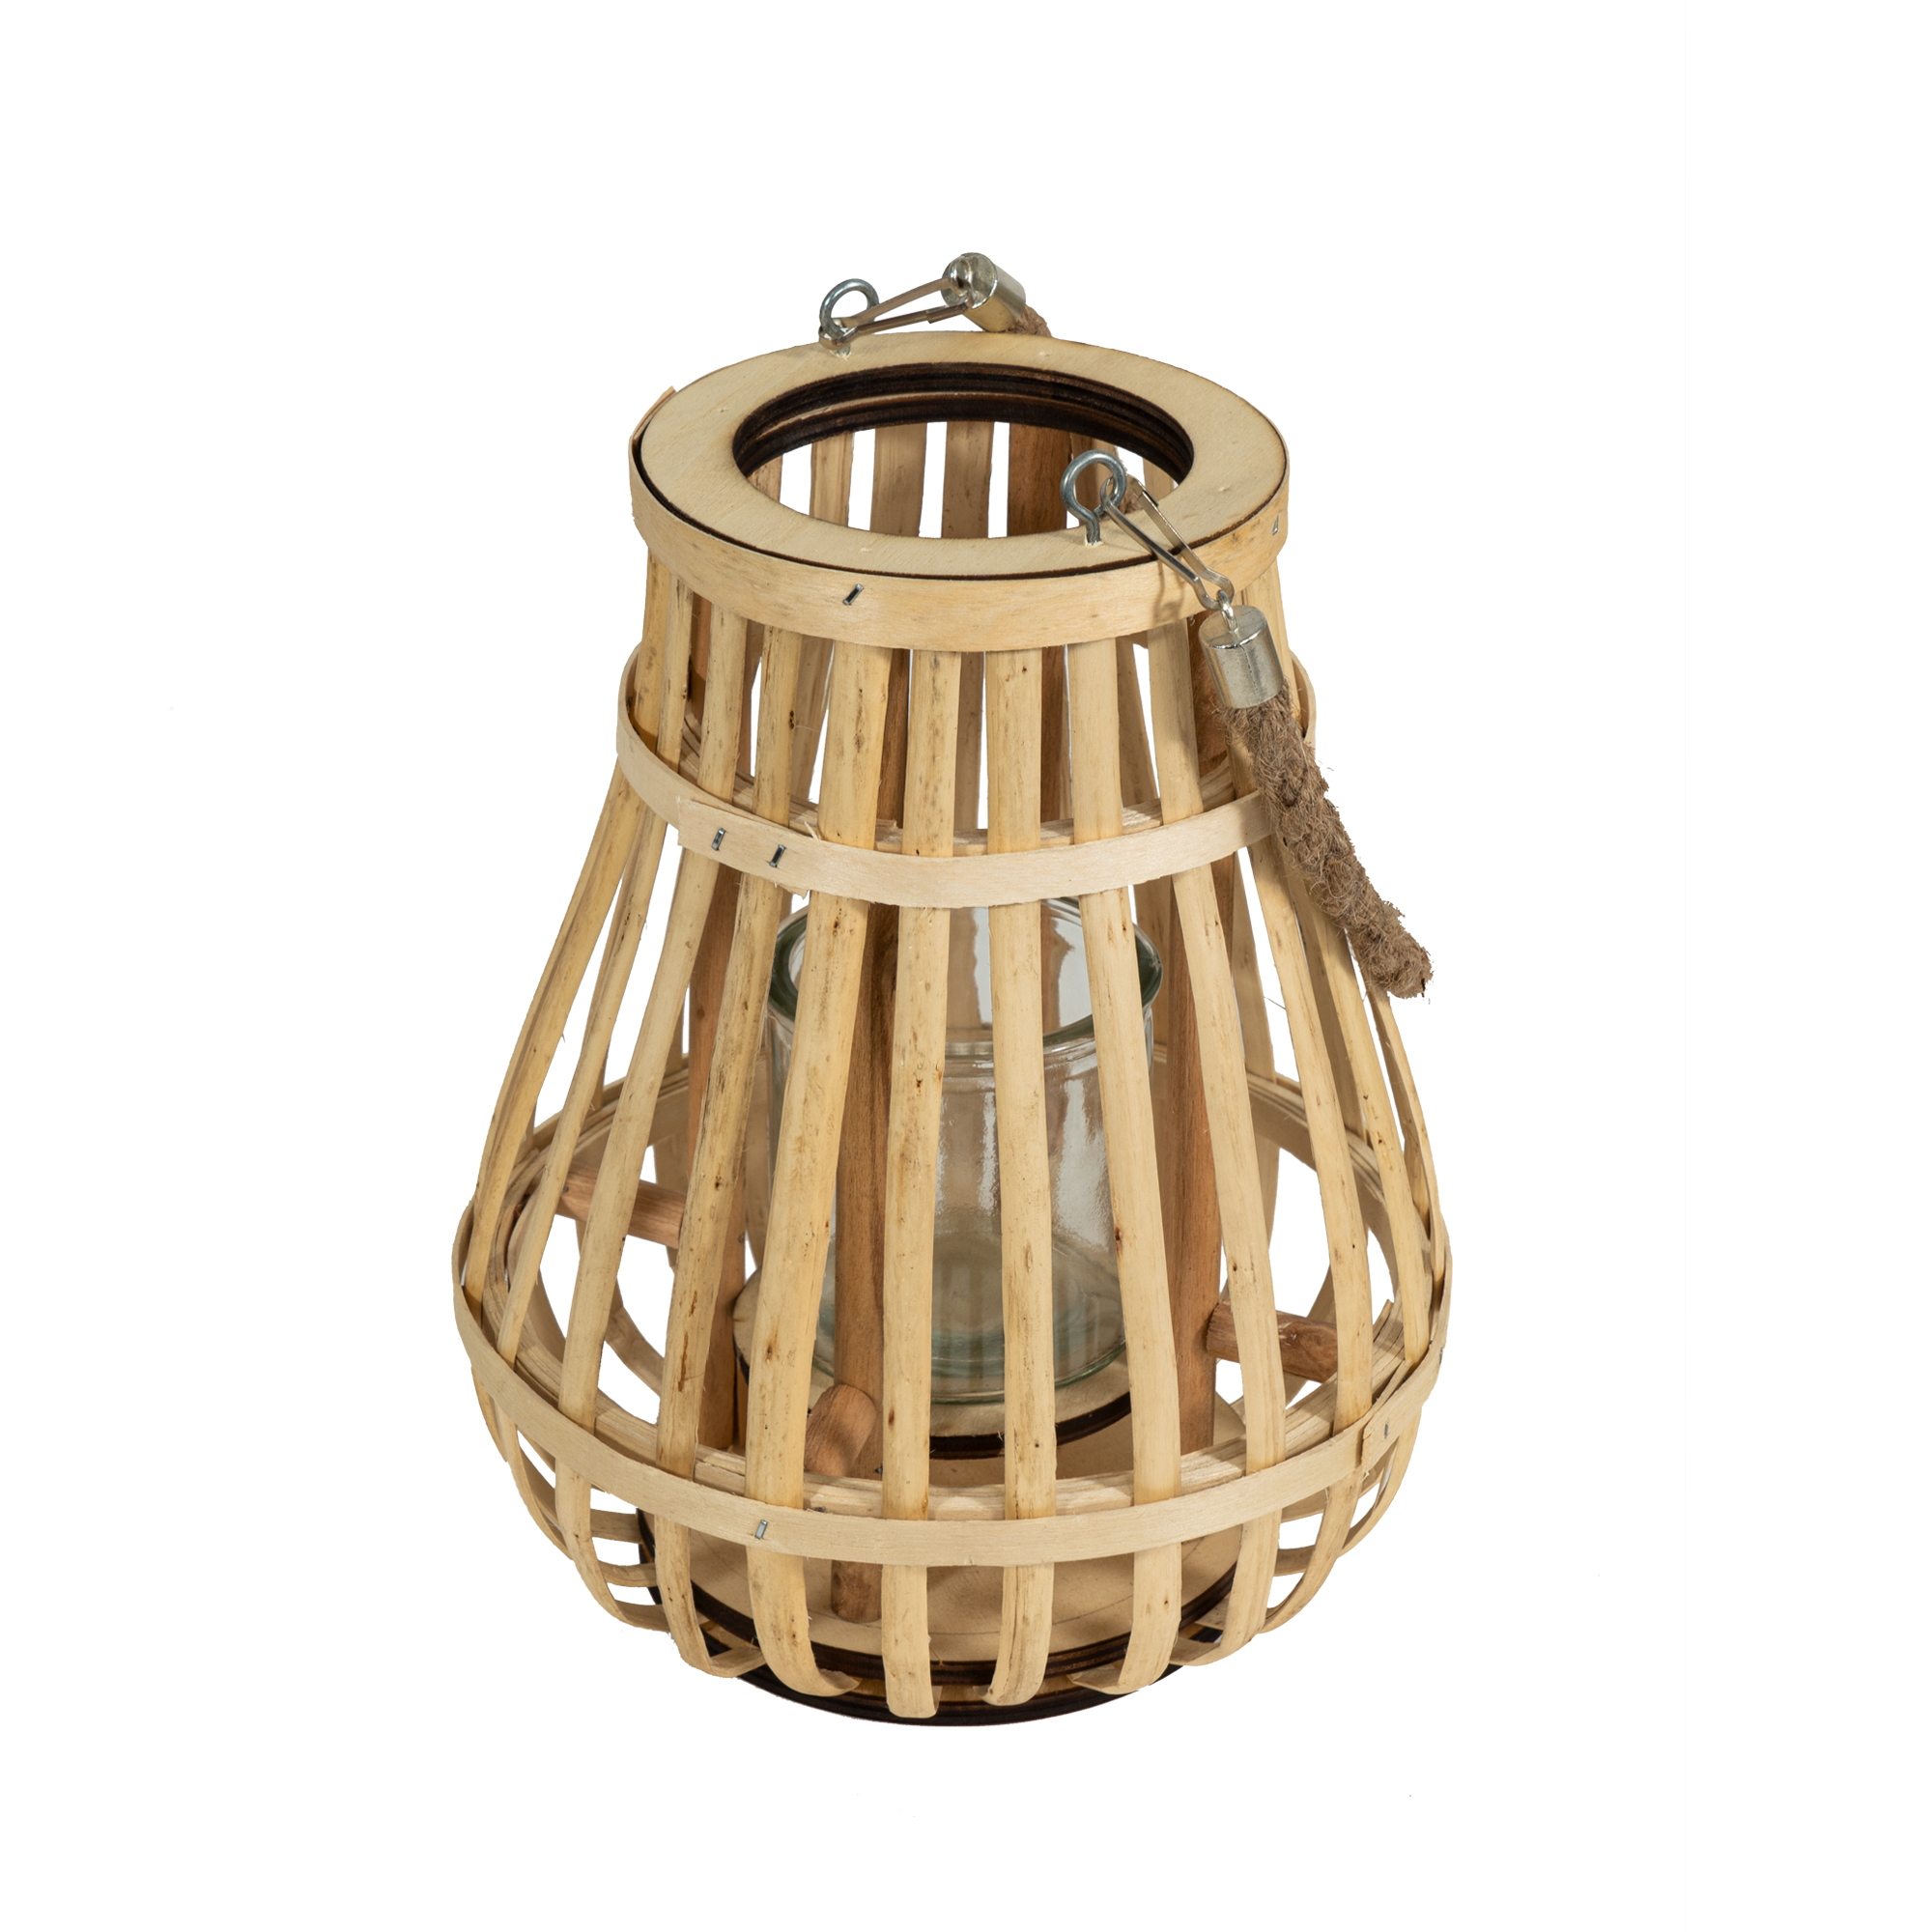 Rattan Lantern With Glass Candle Holder 10"